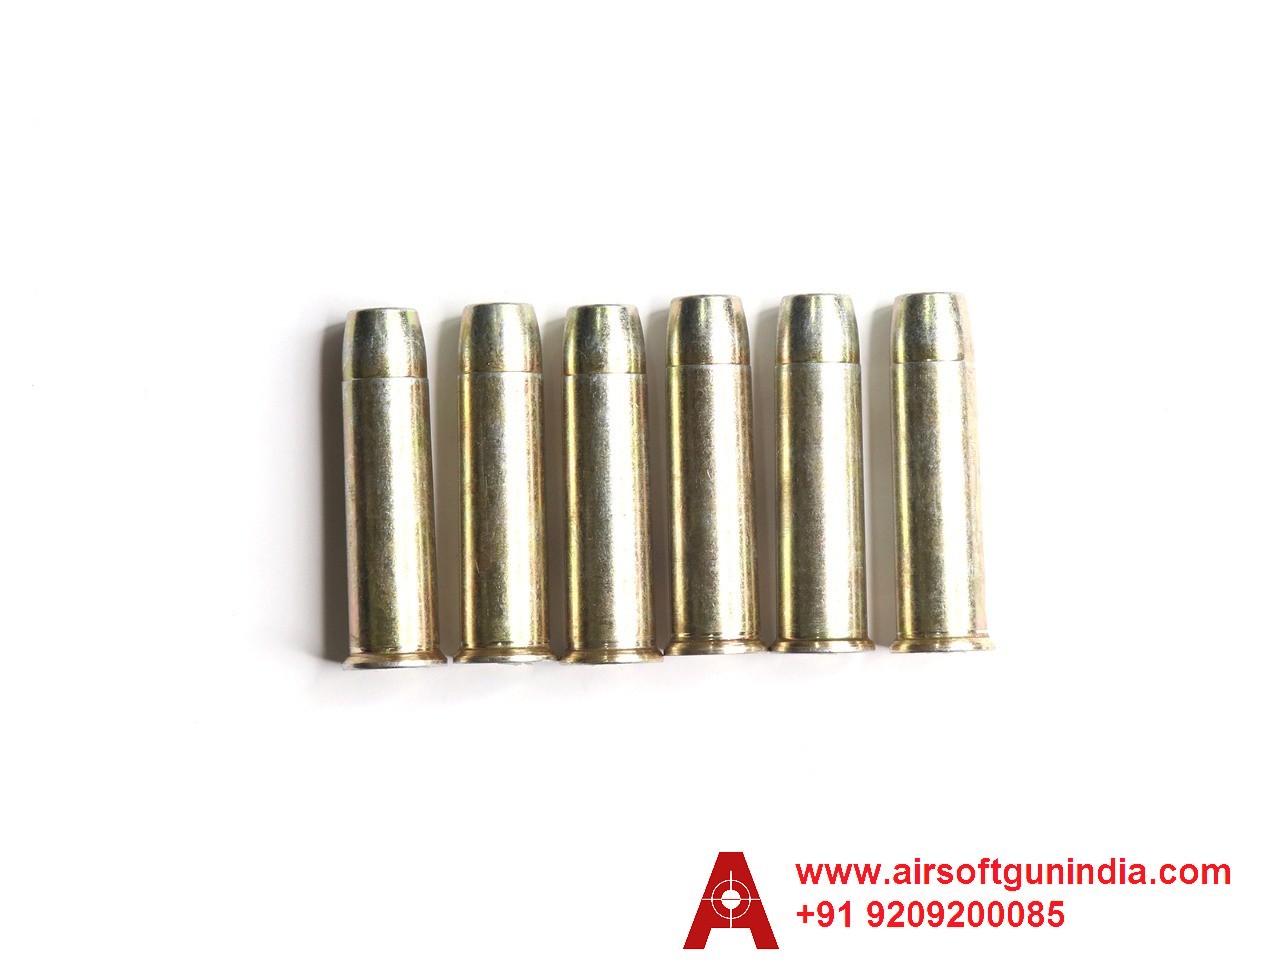 Shells For Smith And Wesson BB Air Revolver Set Of 6 Shells